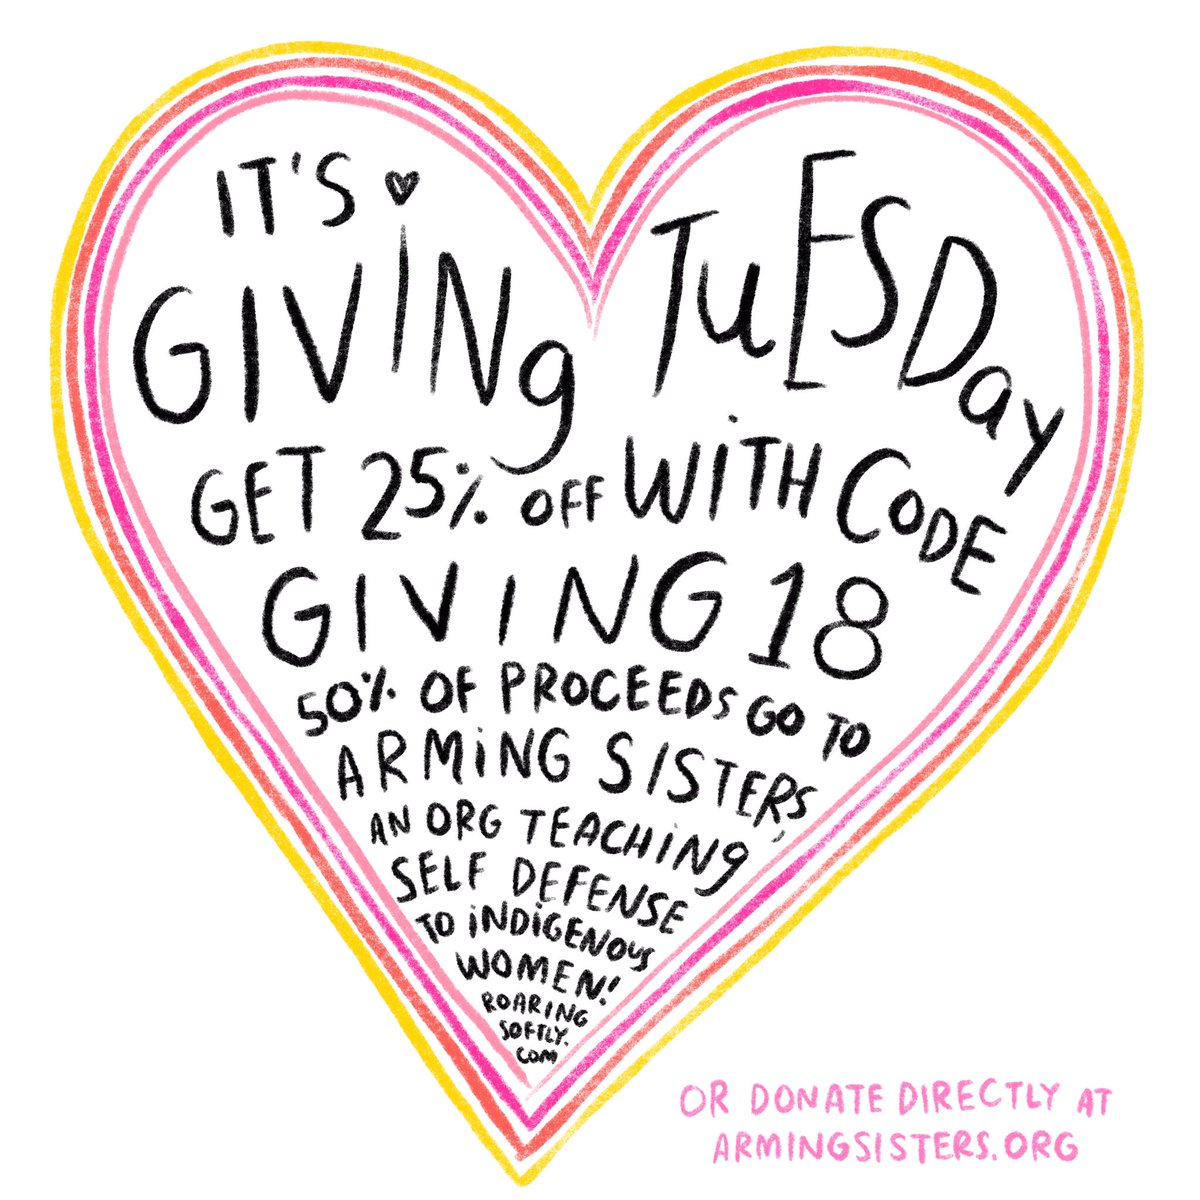 It's #GivingTuesday!  Get 25% off with code GIVING18. Half of today's proceeds go to @ArmingSisters, an org building self-empowerment in Indigenous women through self defense training. ? 

shop at https://t.co/E7RWQbpMUa
donate directly at https://t.co/HJZIuZnX6U 